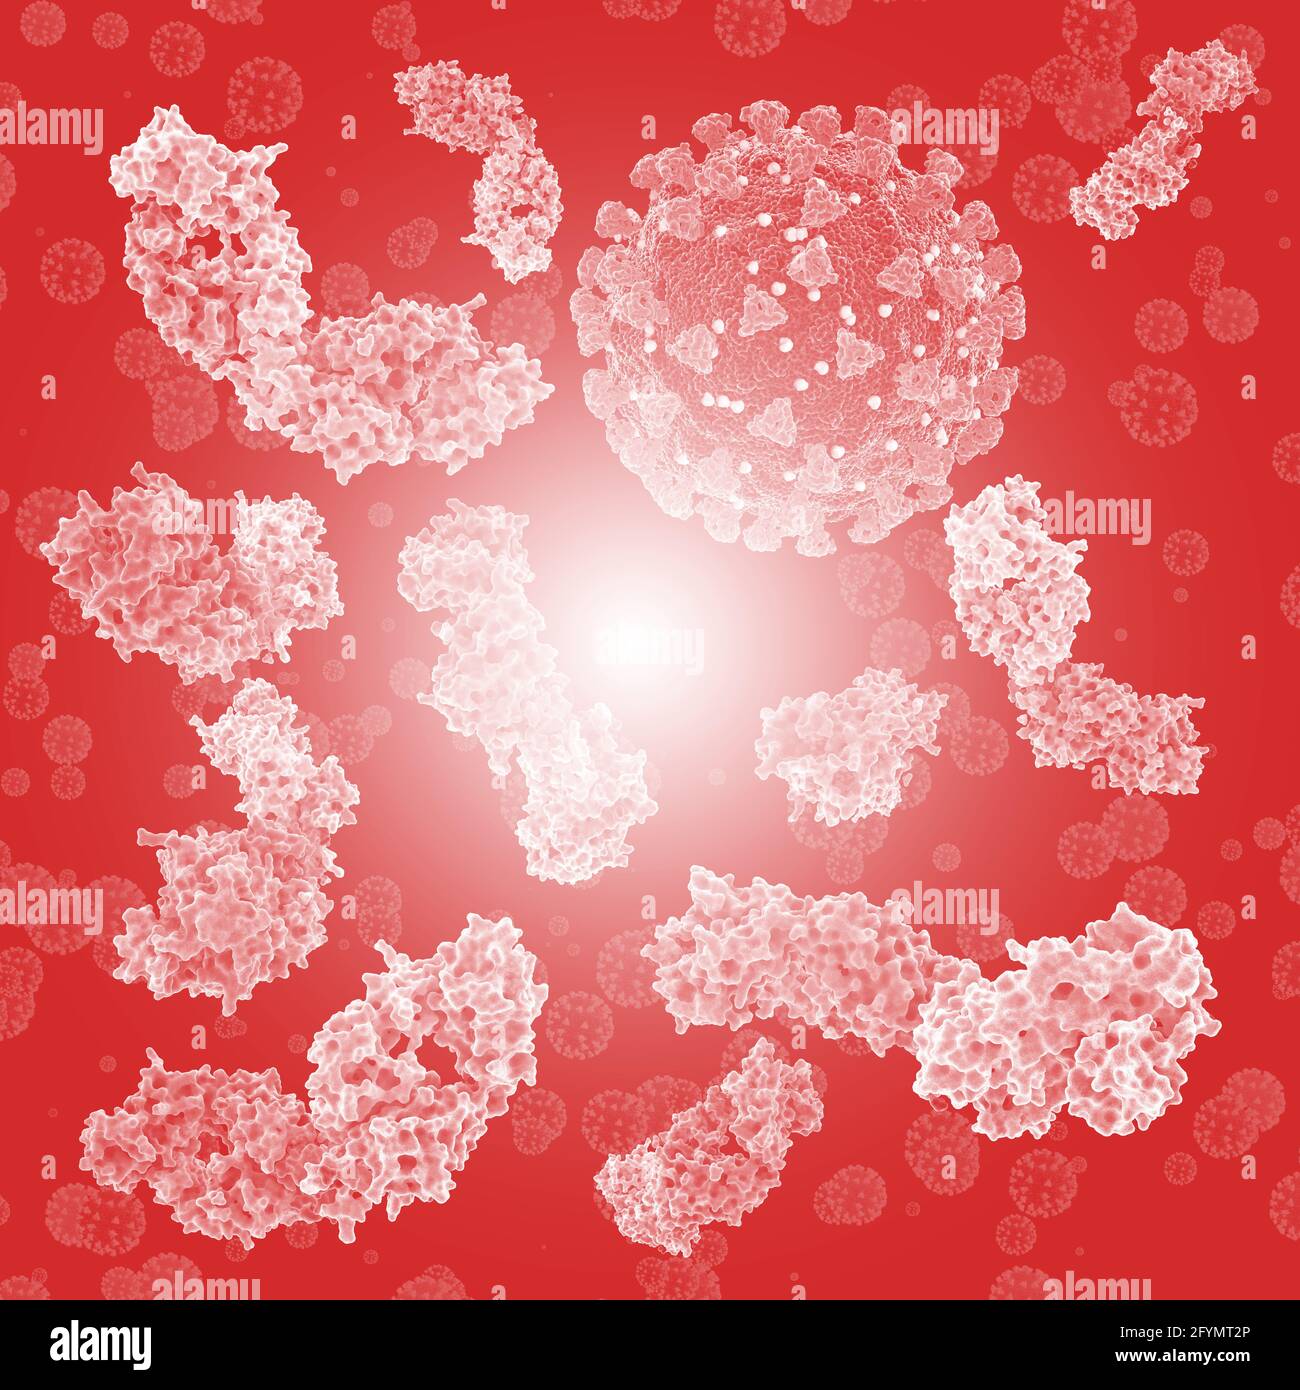 HIV antibodies complexed with peptides, illustration Stock Photo